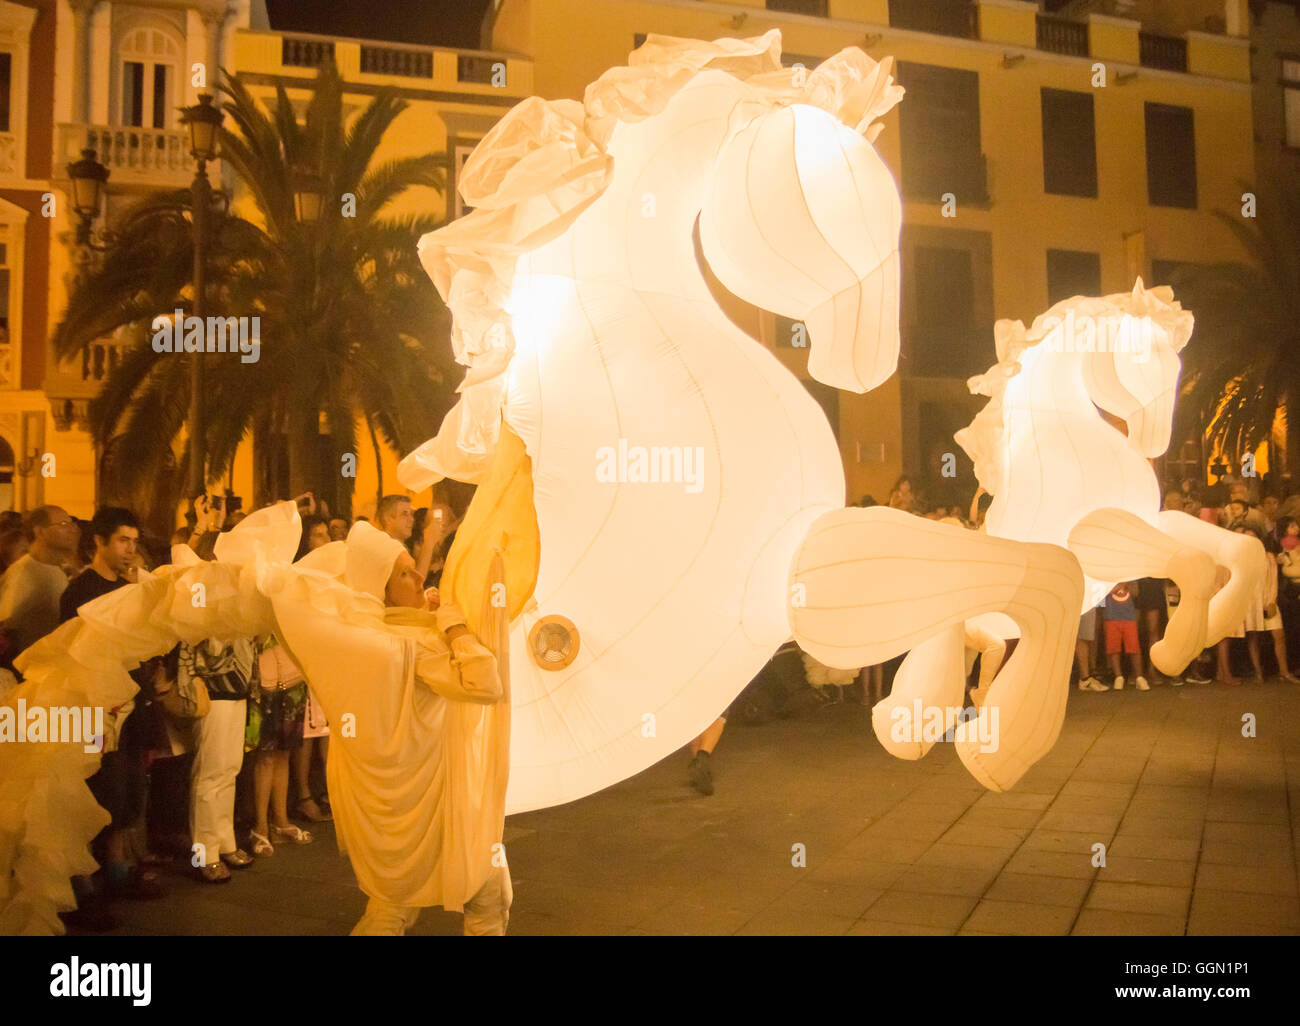 Las Palmas, Gran Canaria, Canary Islands, Spain, 5th August, 2016. Performers from French dance group, Compagnie des Quidams, dance through the streets around the cathedral operating inflated, illuminated white horses during Las Palmas dance festival on Friday night Credit:  Alan Dawson News/Alamy Live News Stock Photo